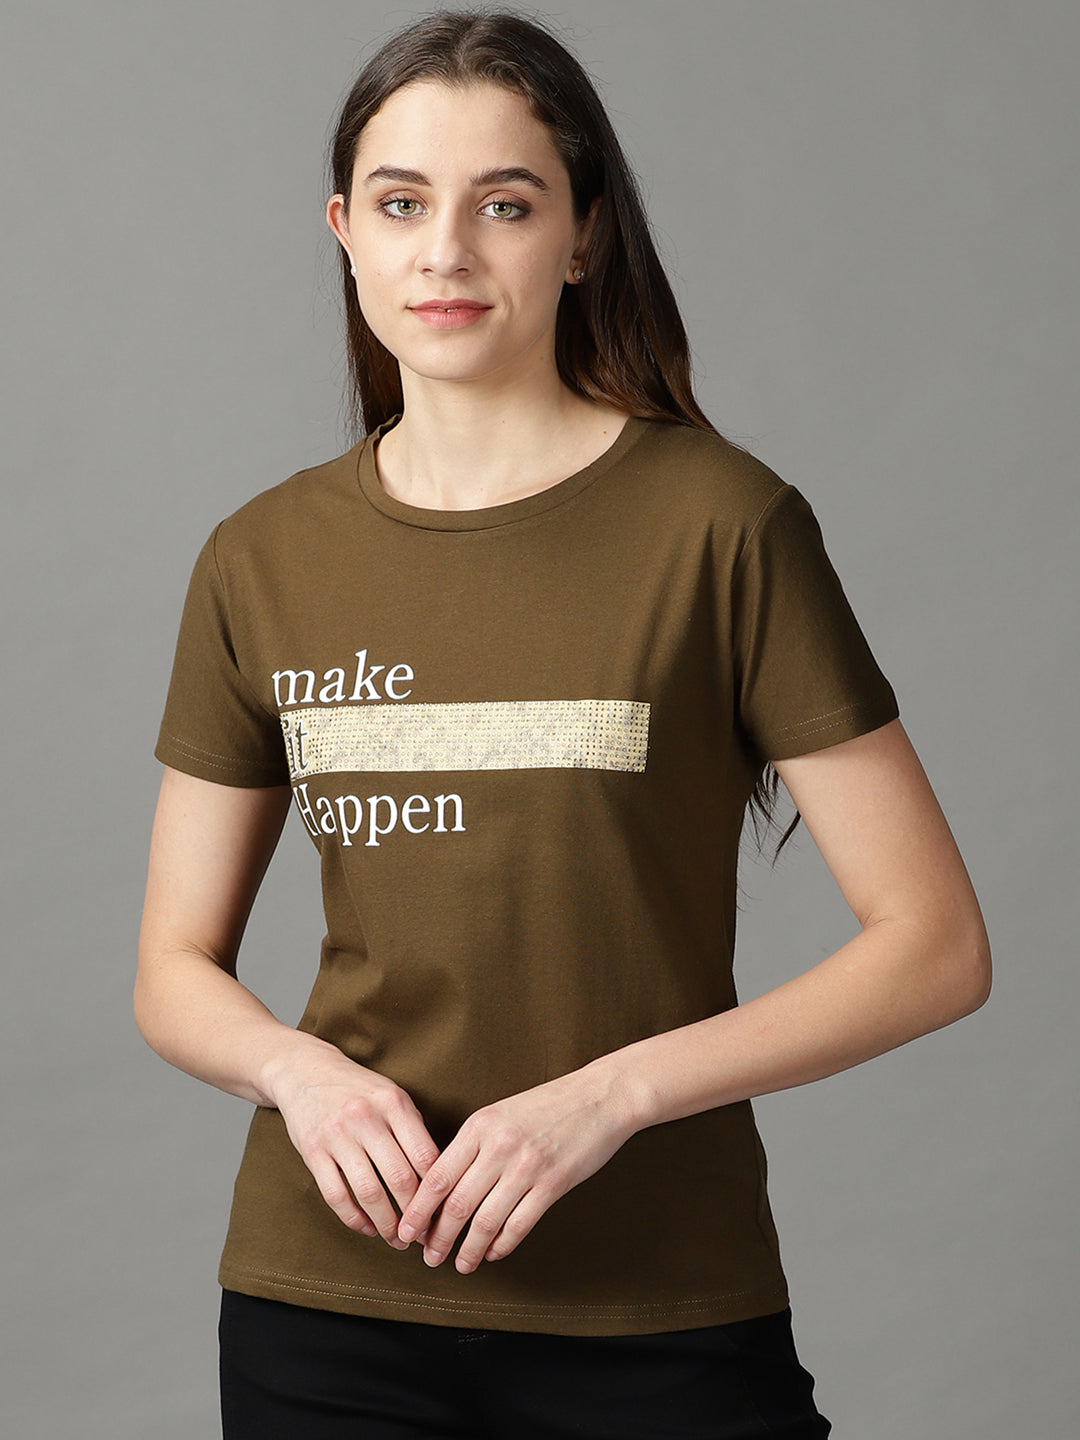 Women's Olive Solid Top